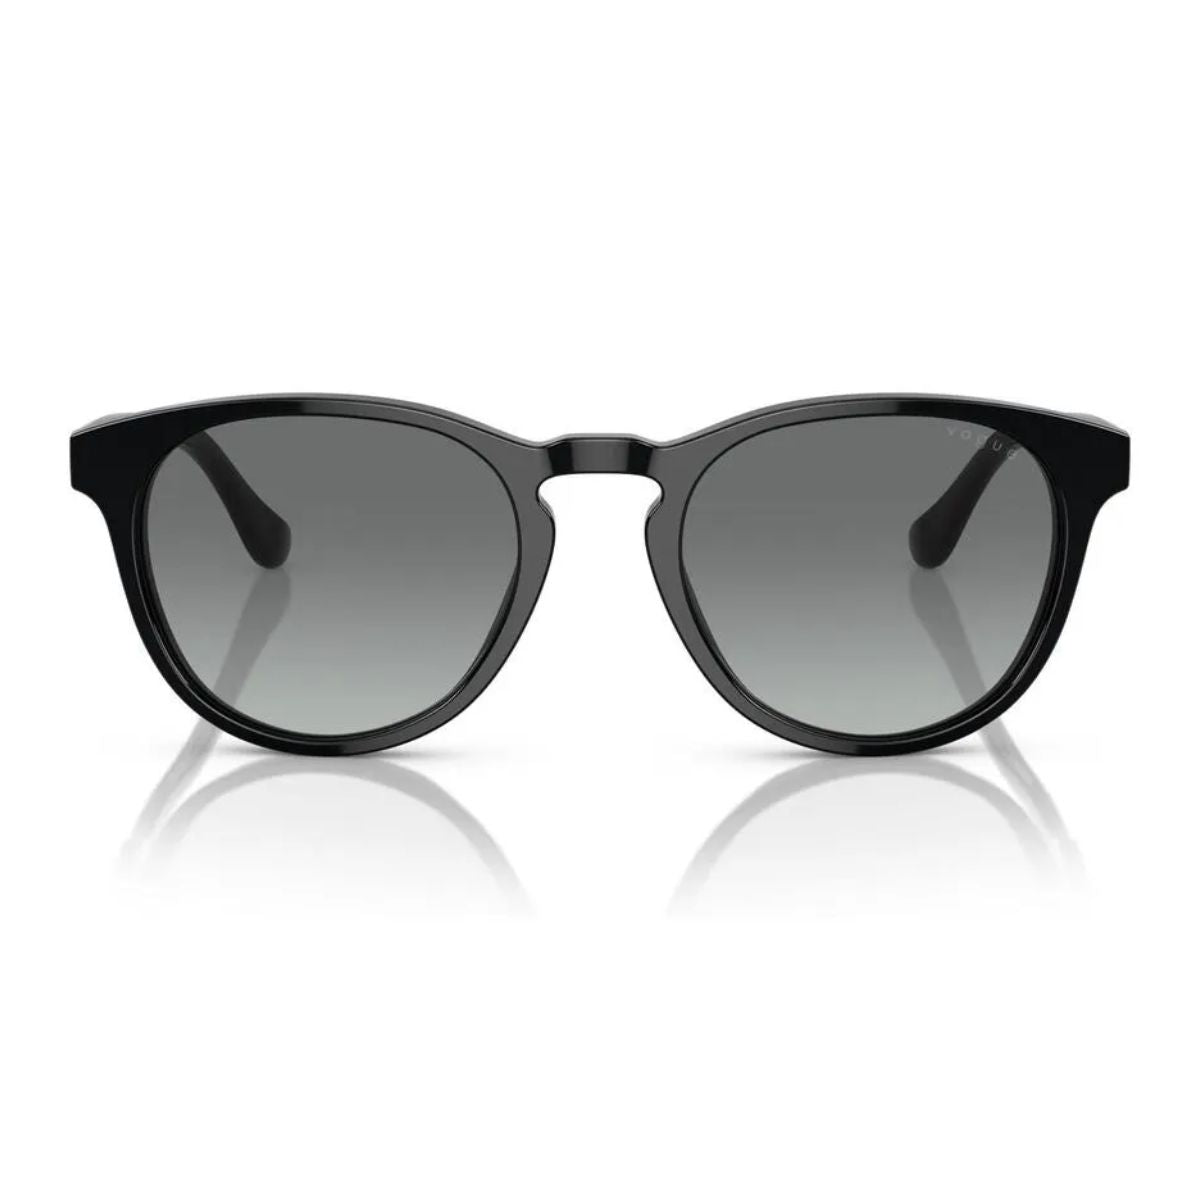 "Buy stylish Vogue Oval Shape Sunglasses For Women's At Online Optorium"